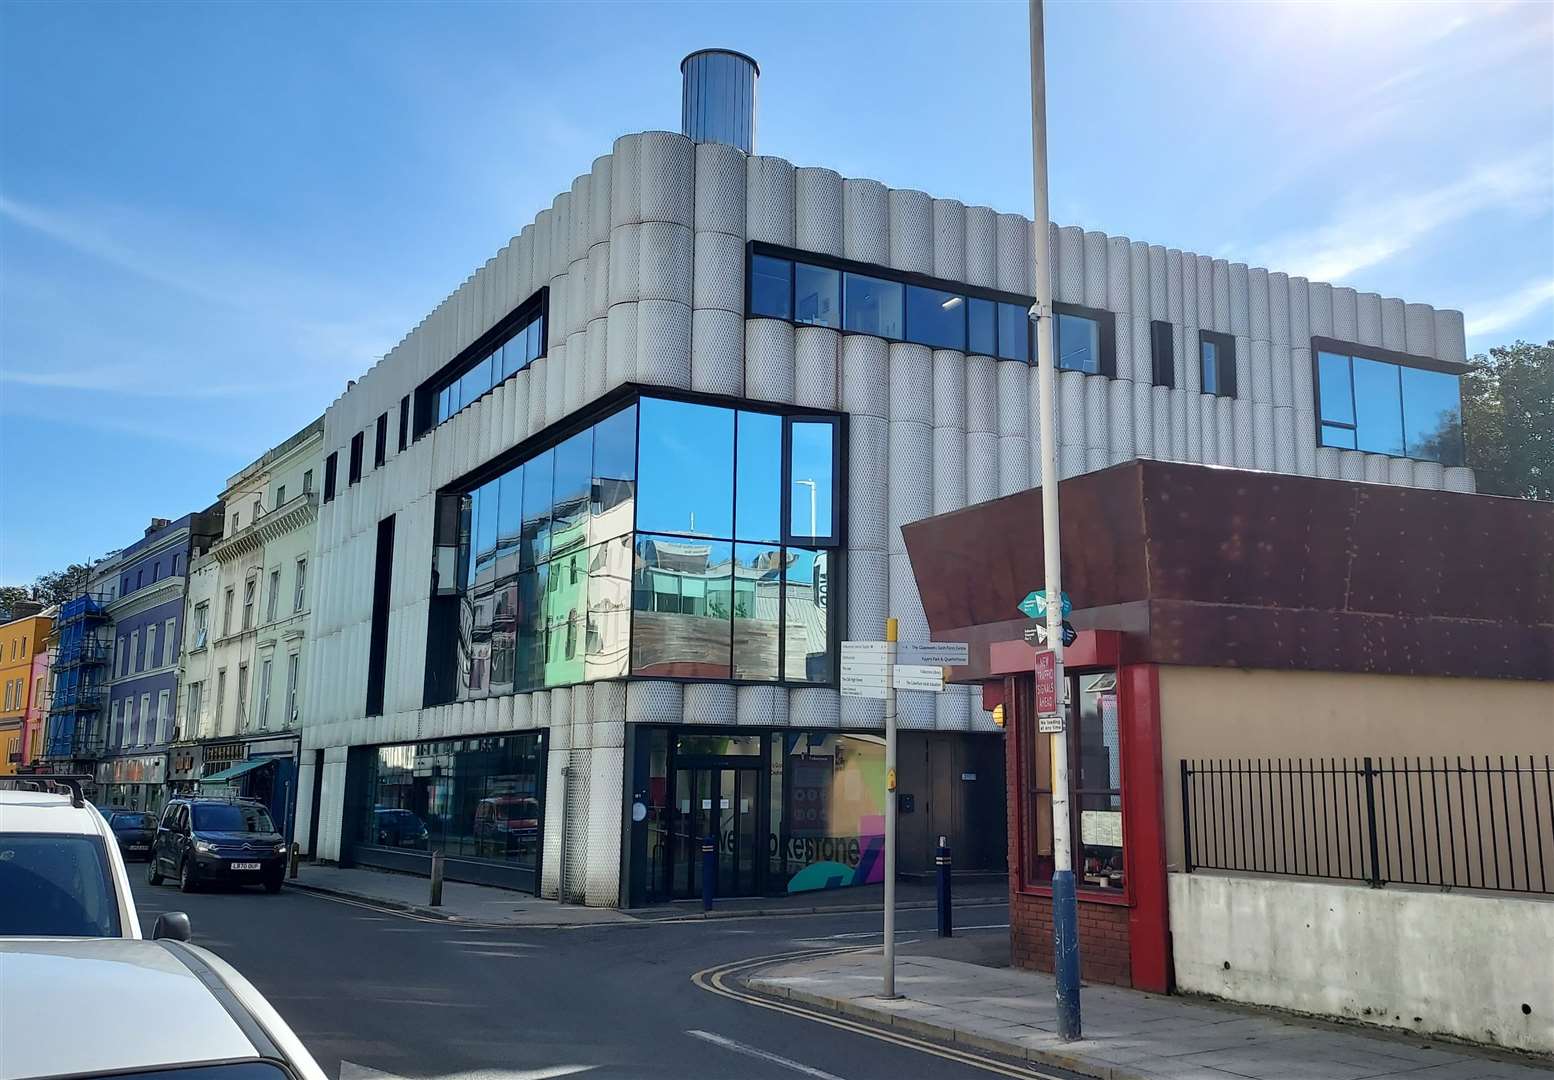 The Quarterhouse arts venue in Tontine Street, Folkestone, will host an opening party for Music in May